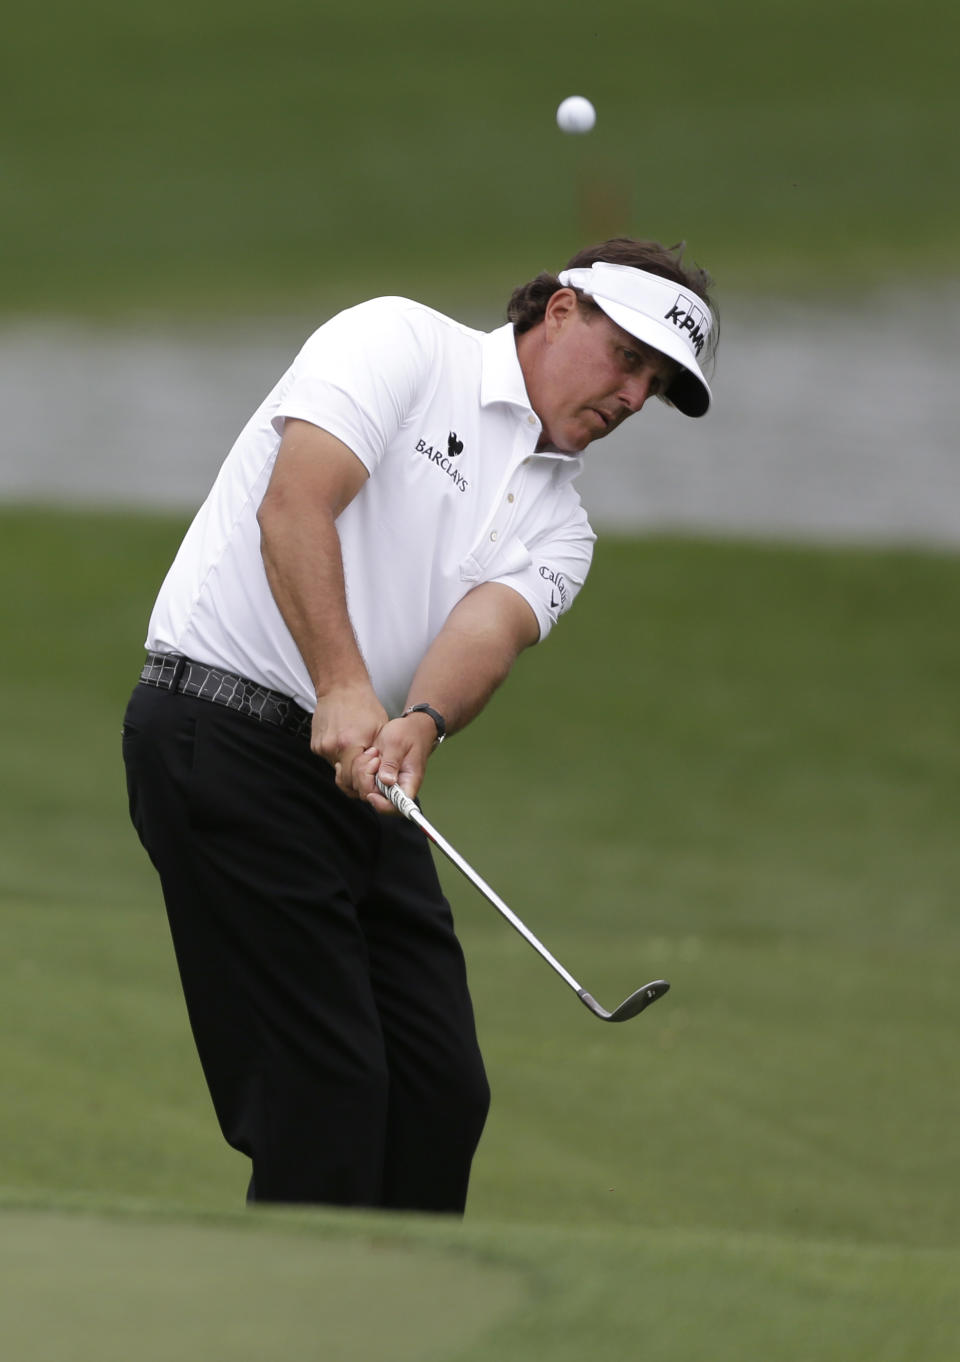 Phil Mickelson chips to the 16th green during the first round of the Wells Fargo Championship golf tournament in Charlotte, N.C., Thursday, May 1, 2014. (AP Photo/Bob Leverone)